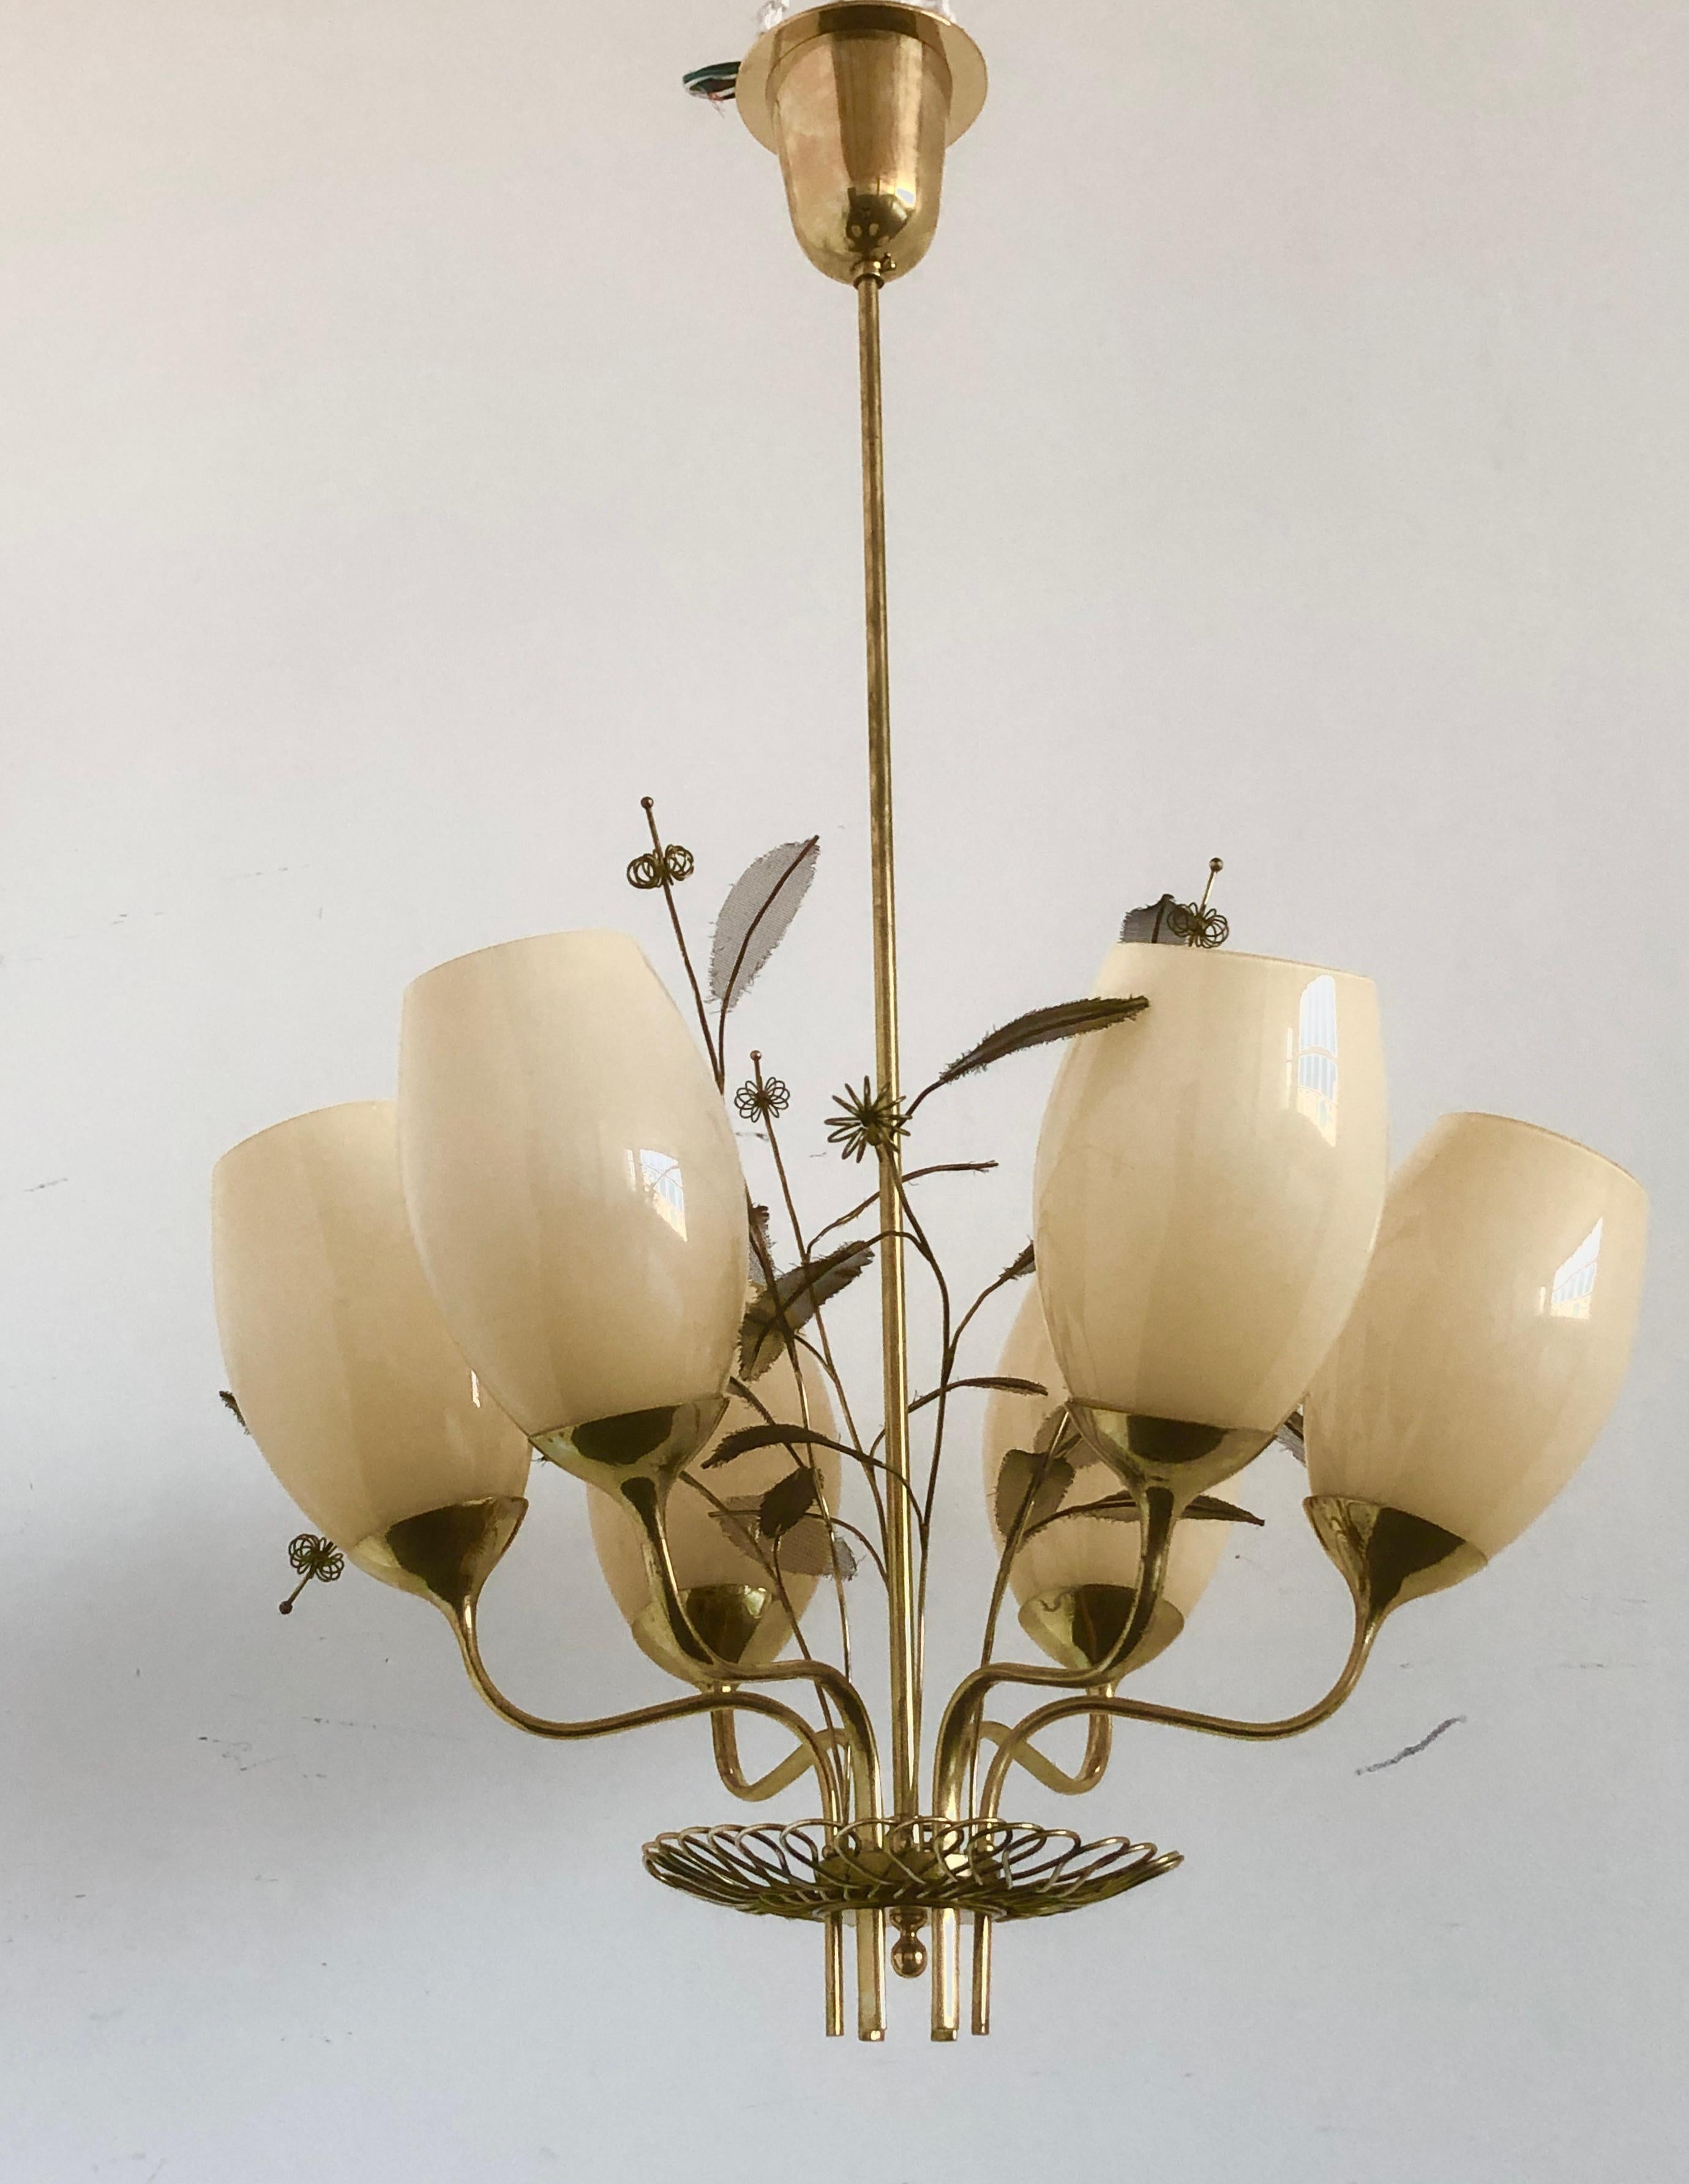 Six lights chandelier designed by Paavo Tynell for Taito Oy, model 9020/6.
Circa 1950th. Stamped by manufacturer. Hand blown glass shades later made.
Newly rewired.